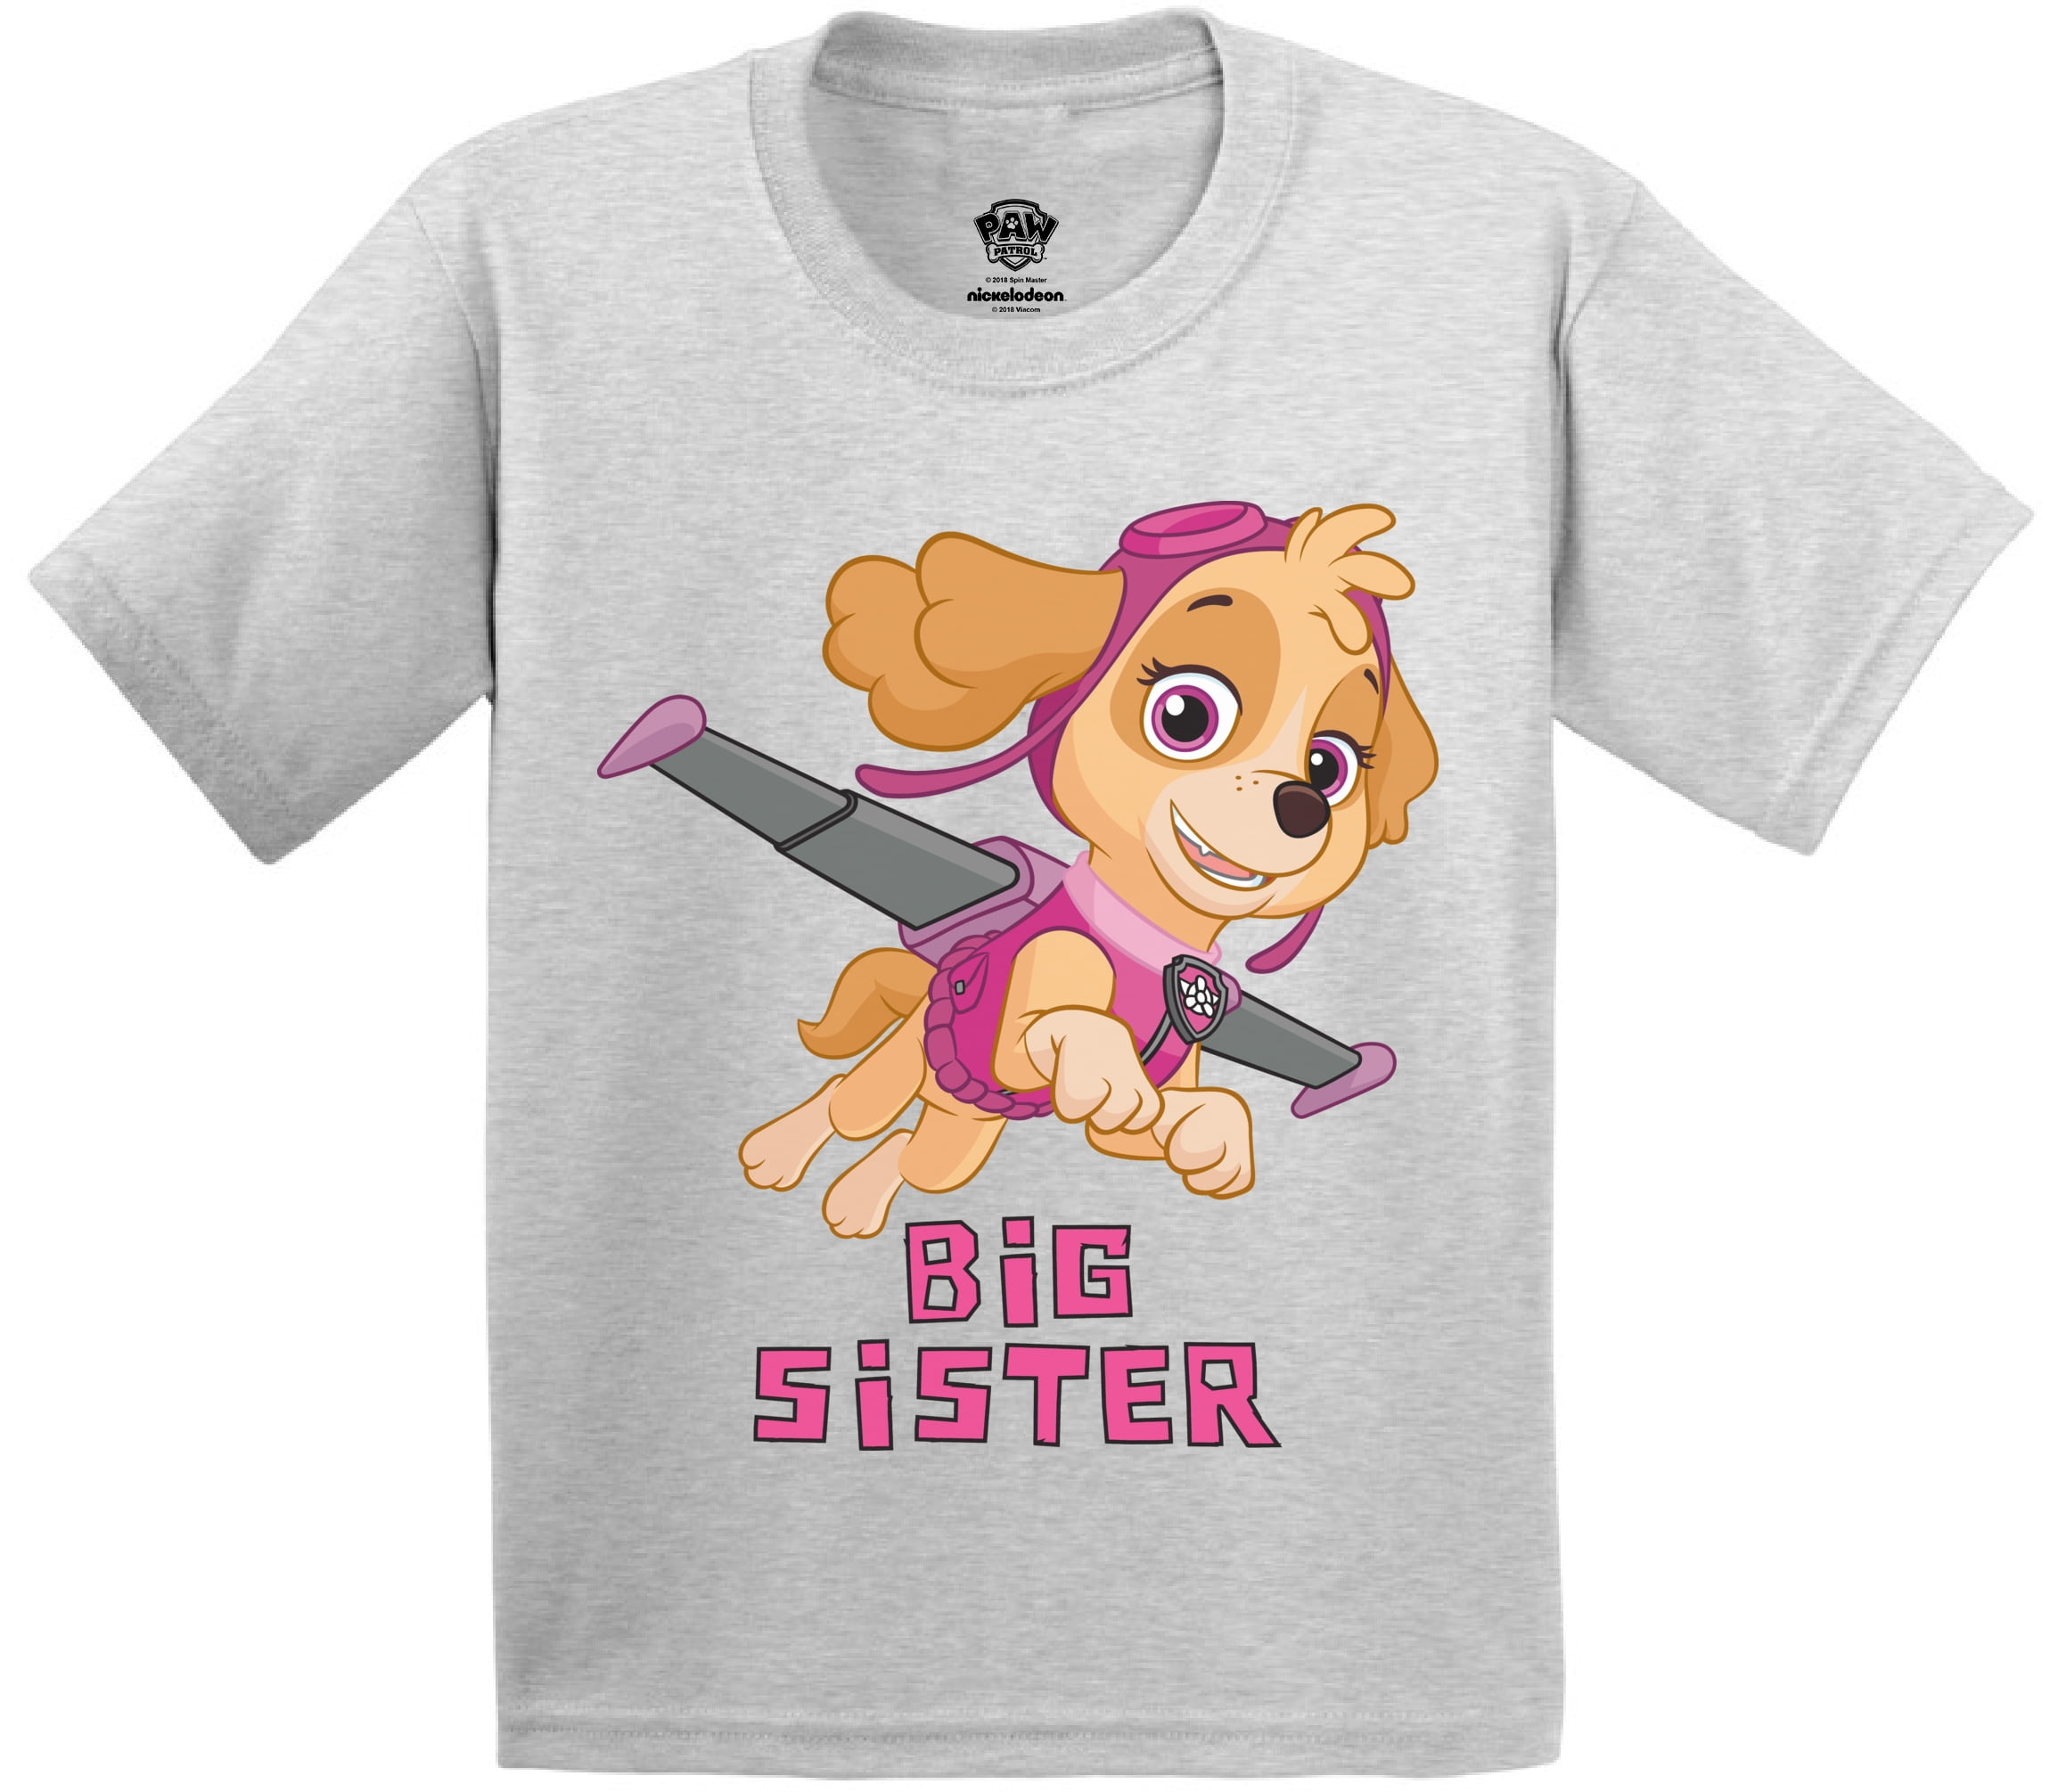 Paw Patrol Skye Big Sister Shirt Outfit Gift Toddler Kids Girls/' Fitted T-Shirt